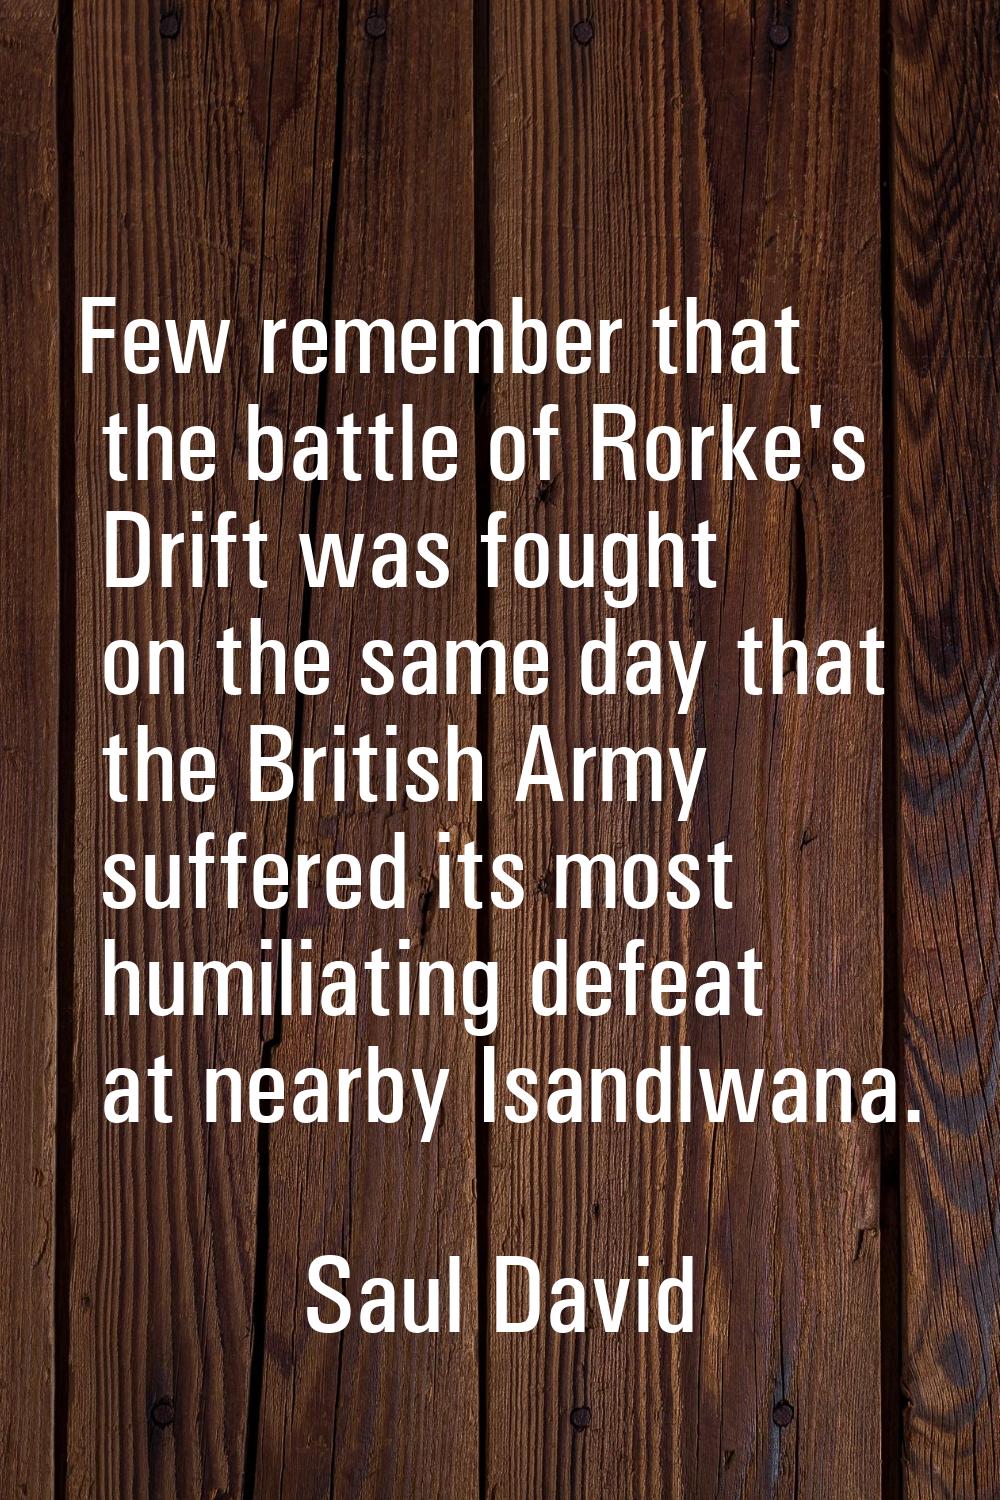 Few remember that the battle of Rorke's Drift was fought on the same day that the British Army suff